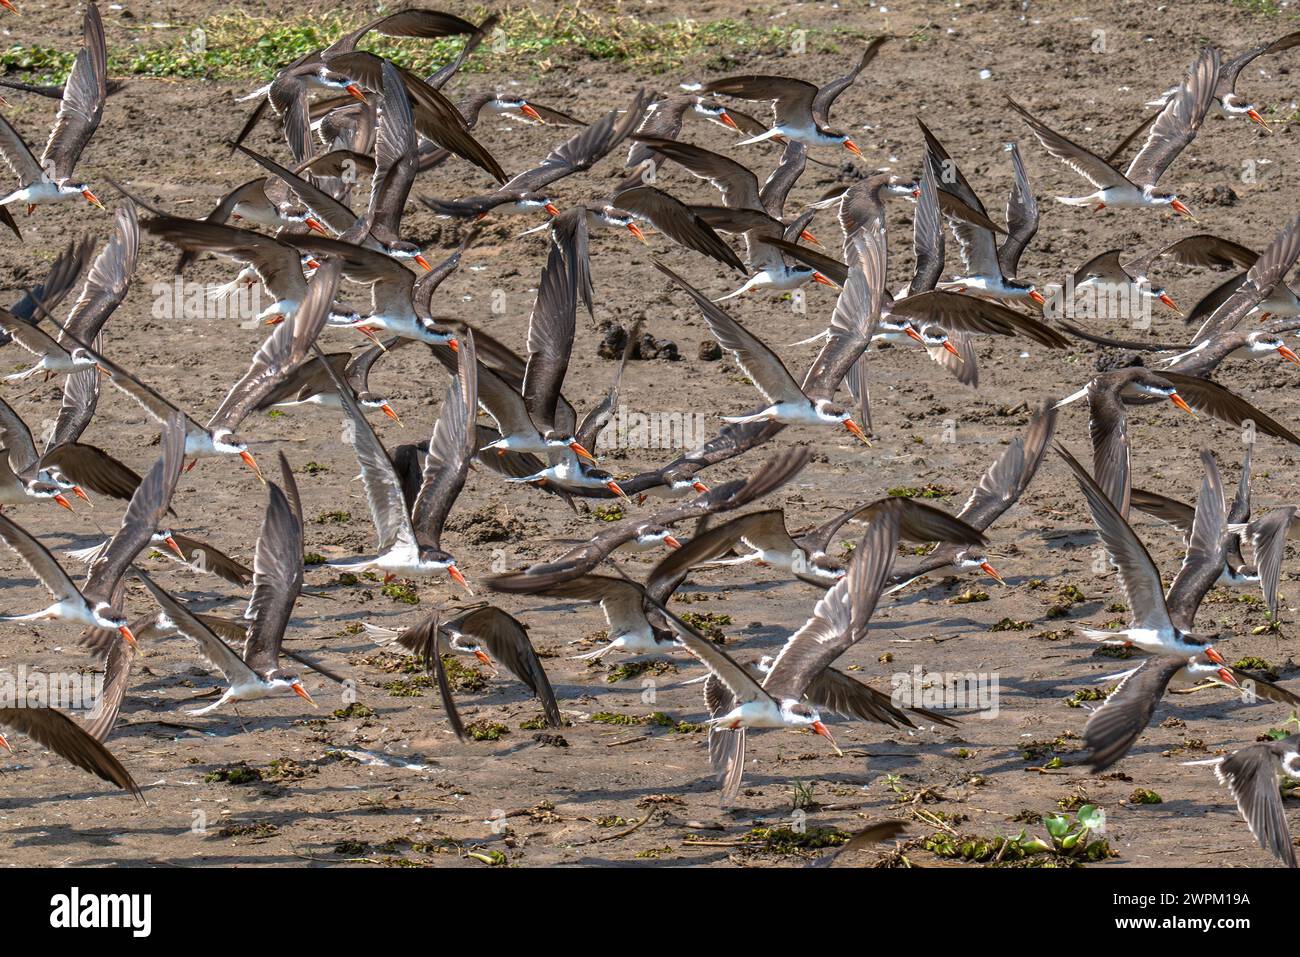 Flight of African skimmers along the Nile river, Murchison Falls National Park, Uganda, East Africa, Africa Stock Photo